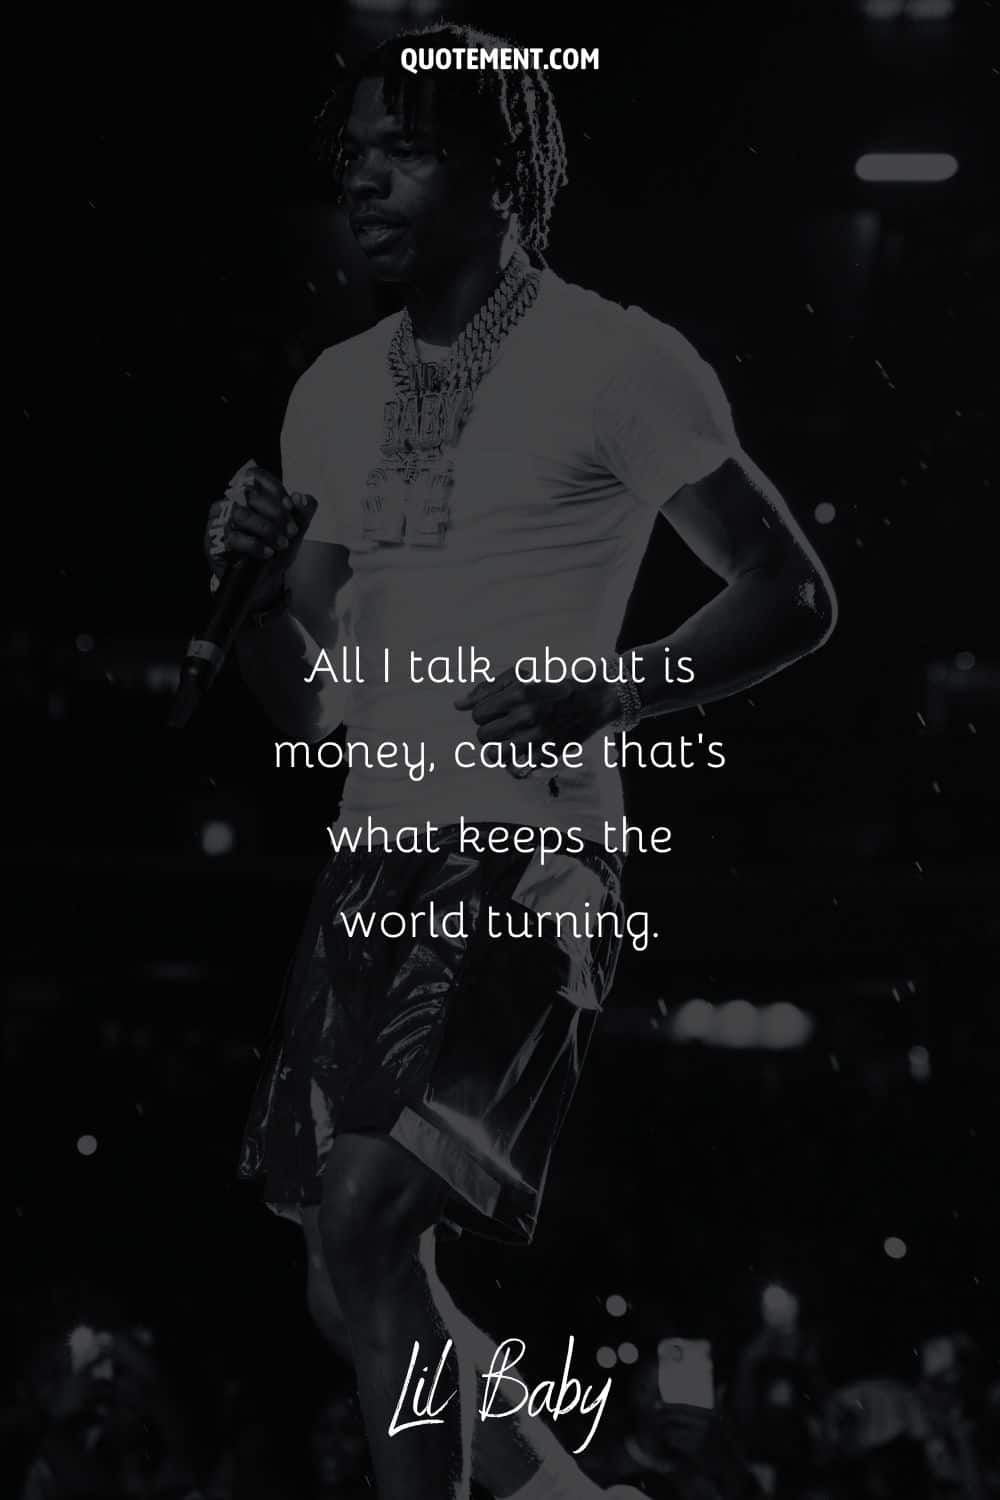 rapper with chains image representing money quote by lil baby